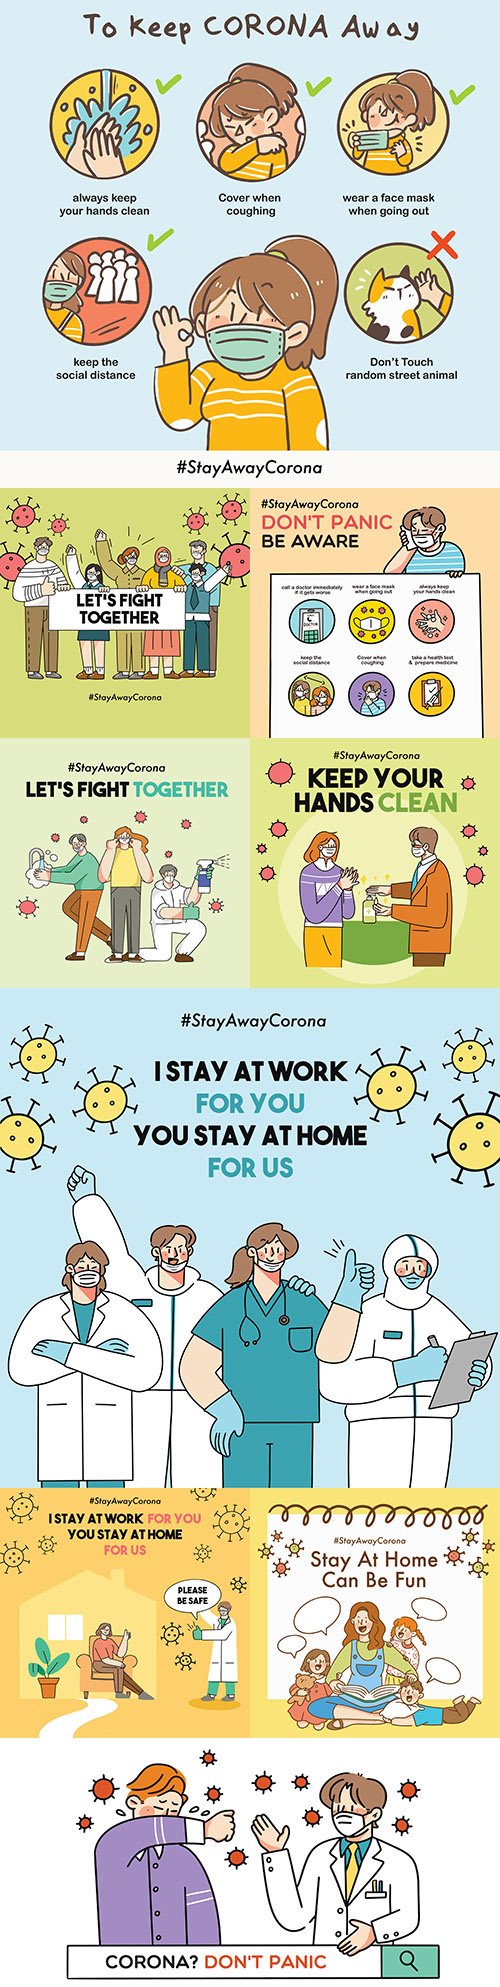 Stay home for safety and let 's fight coronavirus together